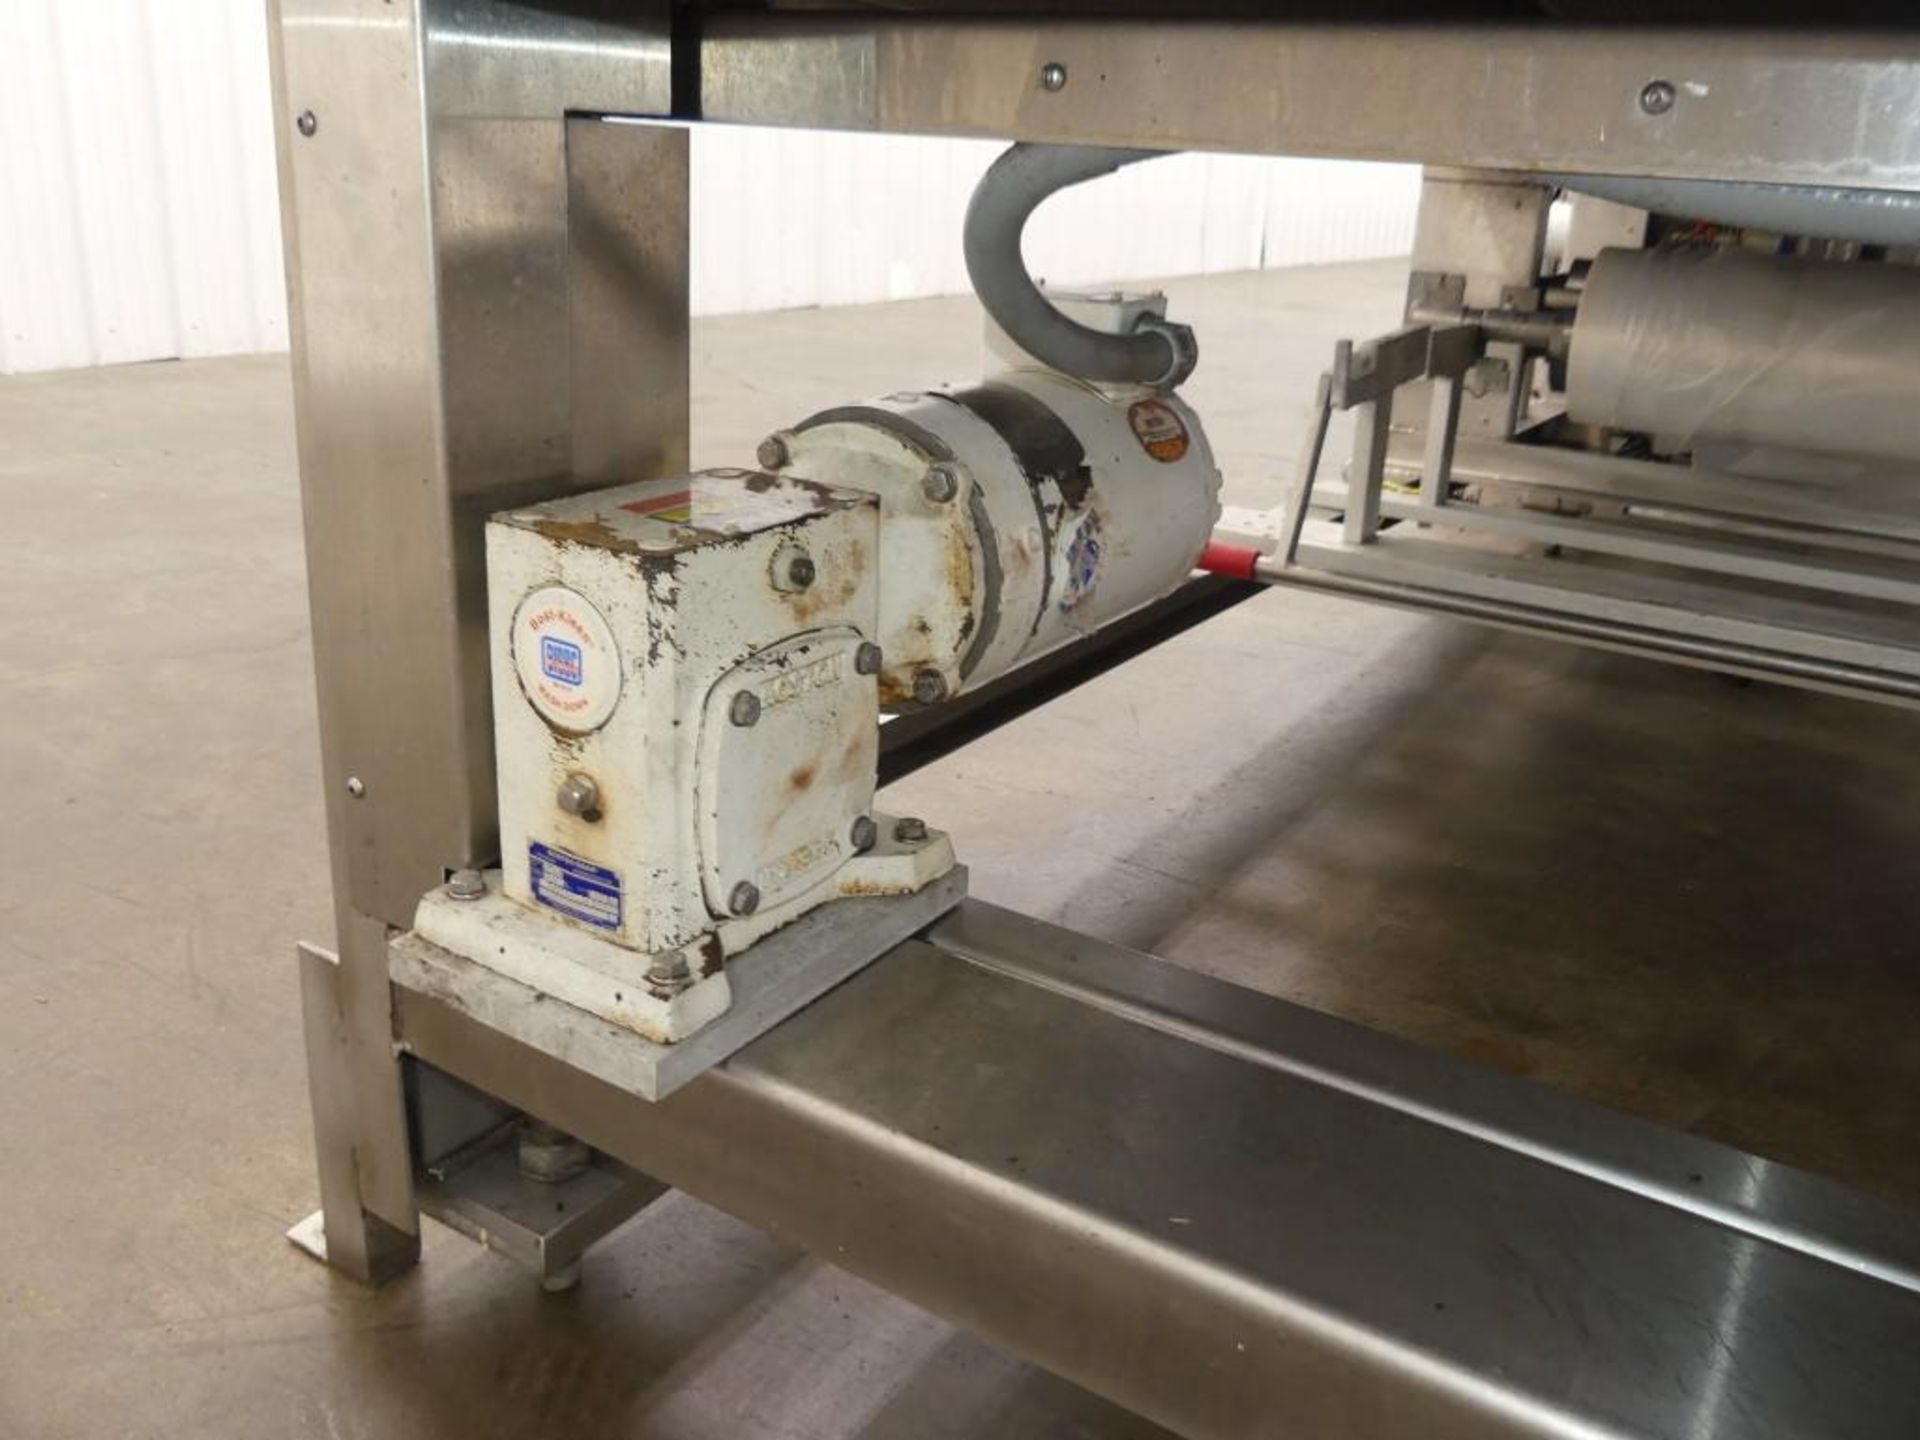 Arpac Delkor Spot-Pak 112-SS-24 Automatic Stainless Steel Shrink Bundler - Image 44 of 101